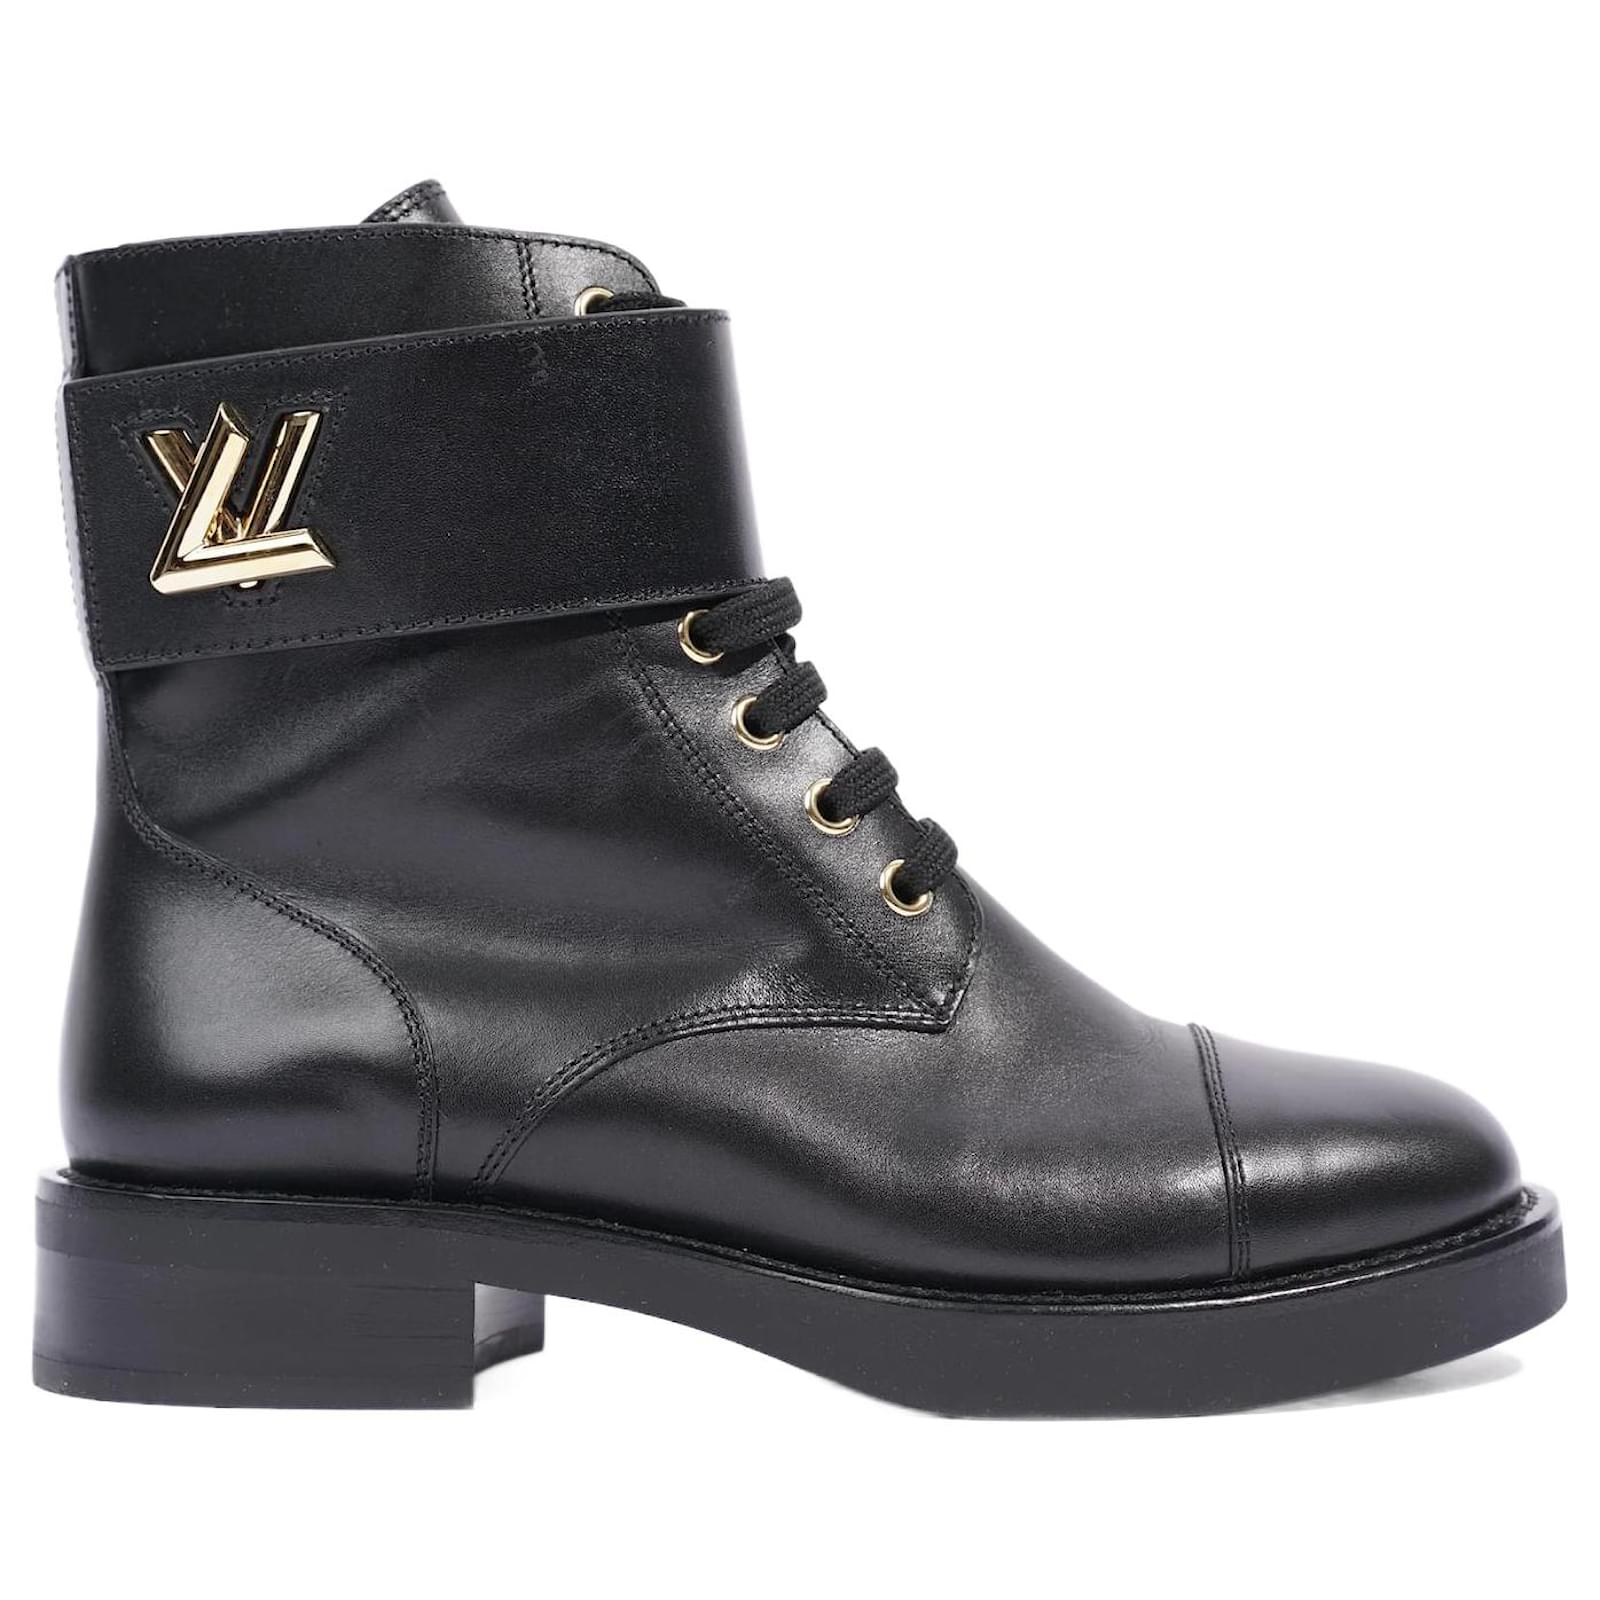 Louis Vuitton Boots/Booties Women Size 36. Black Leather with LV Monogram.